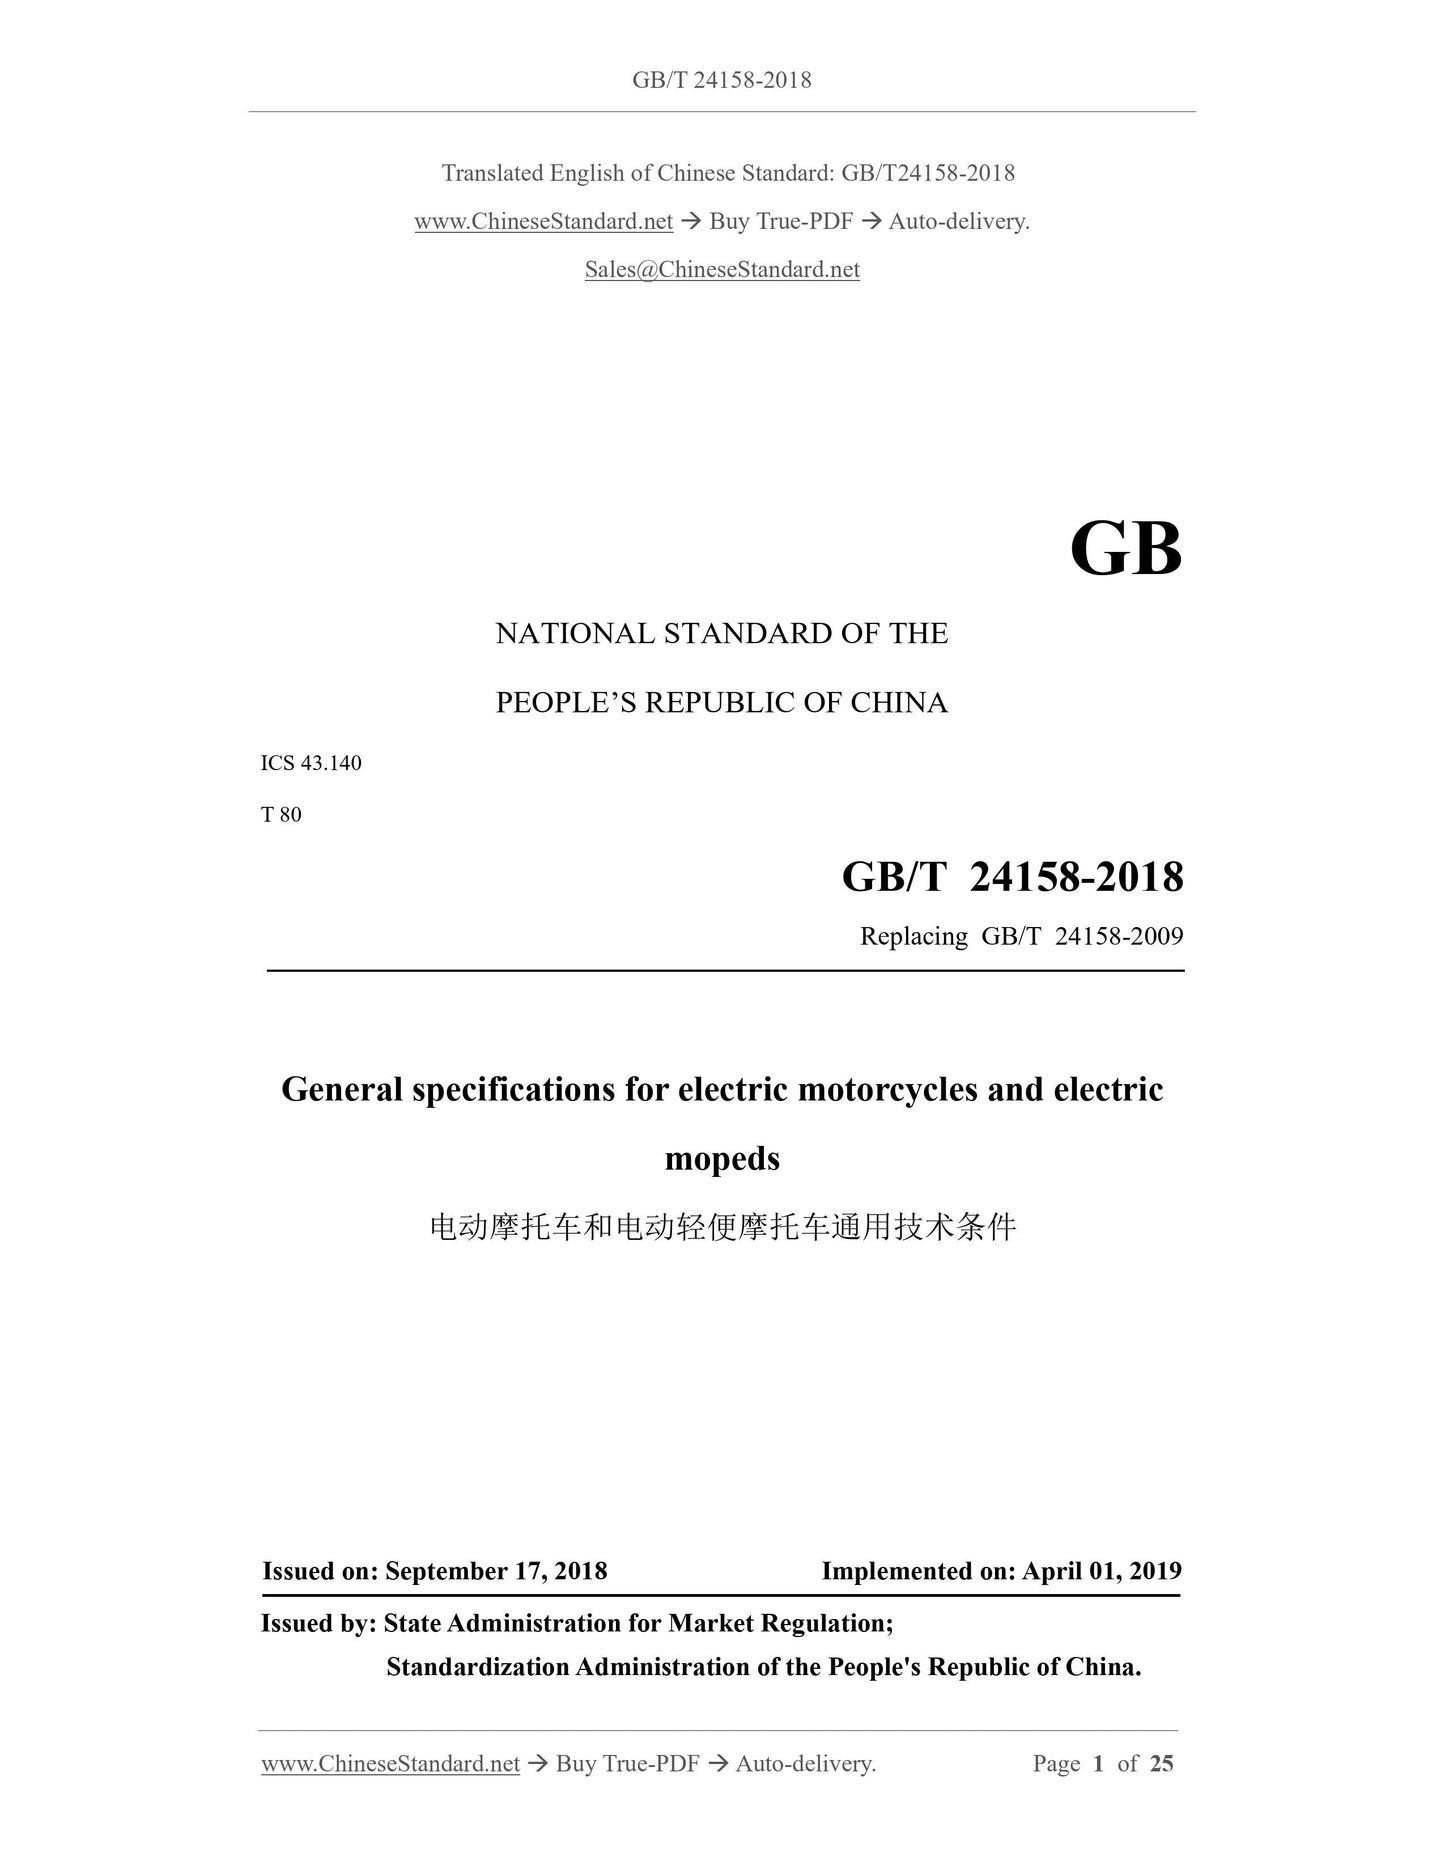 GB/T 24158-2018 Page 1